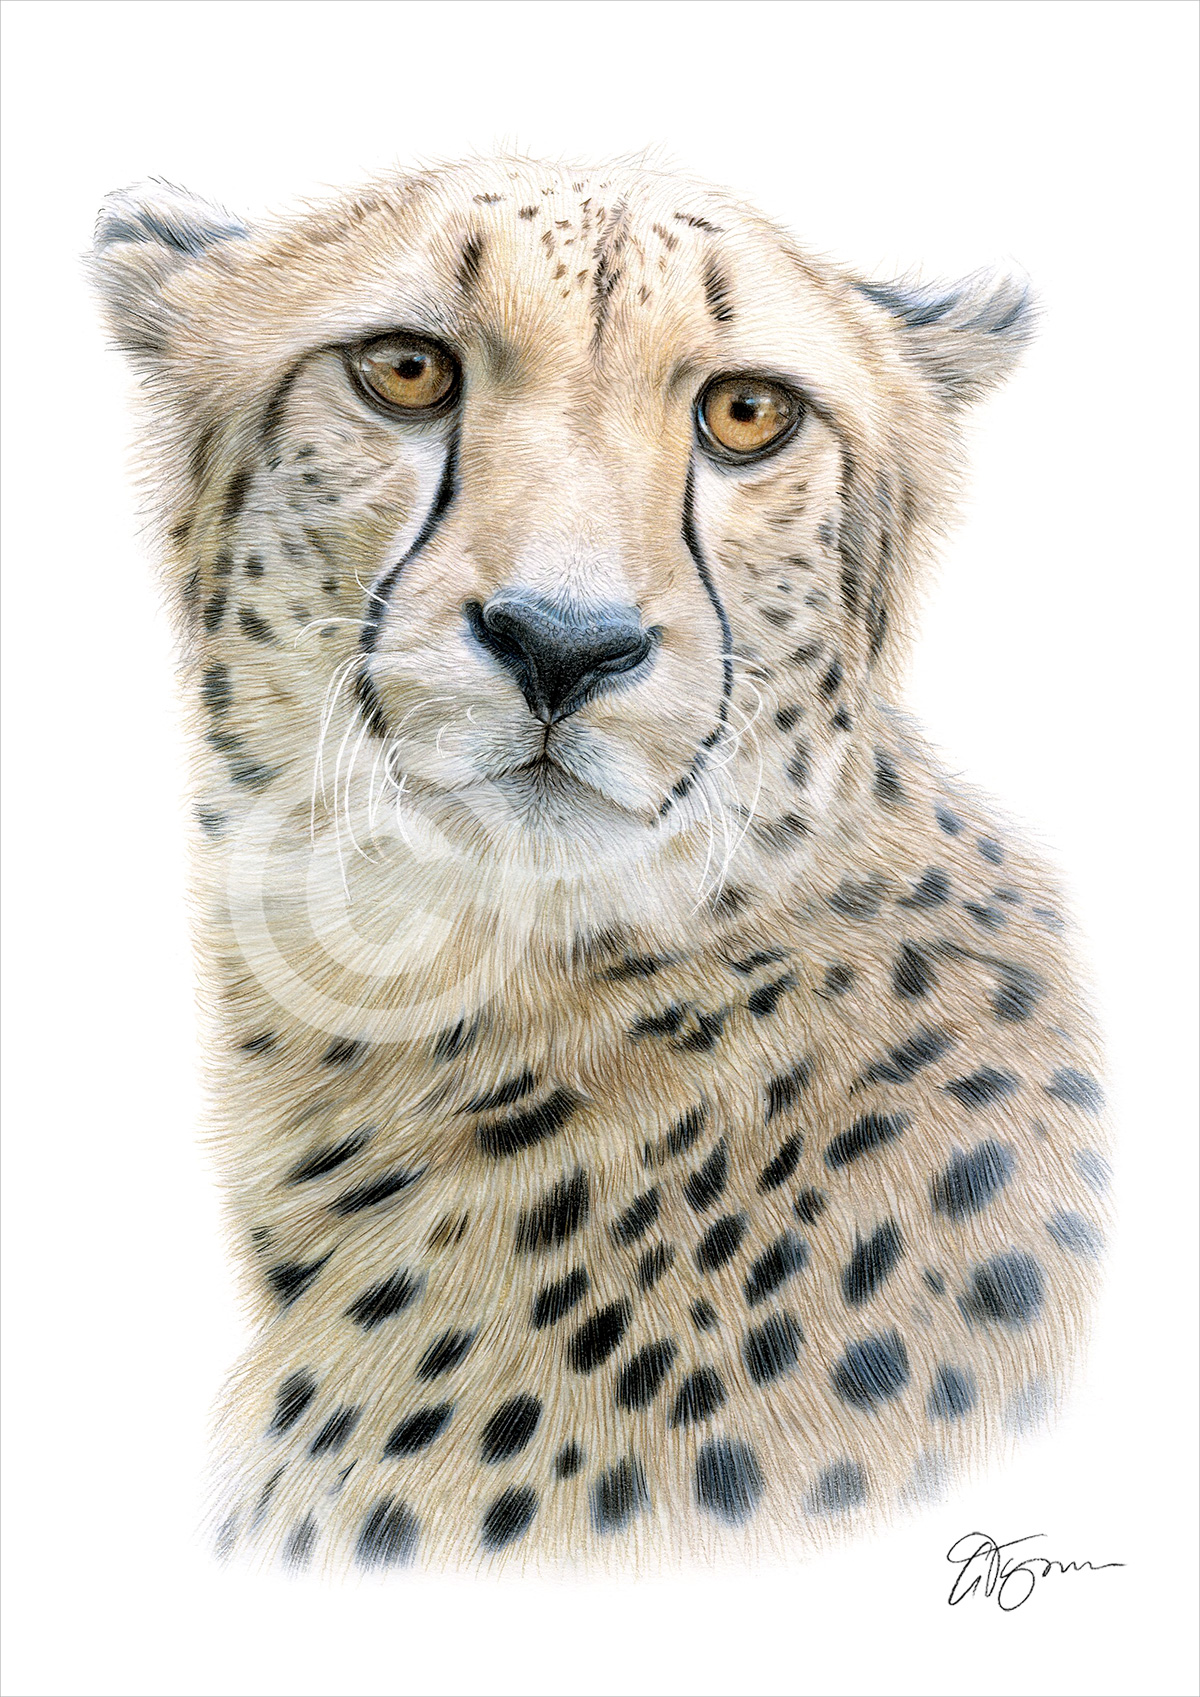 Colour pencil drawing of an adult Cheetah by artist Gary Tymon